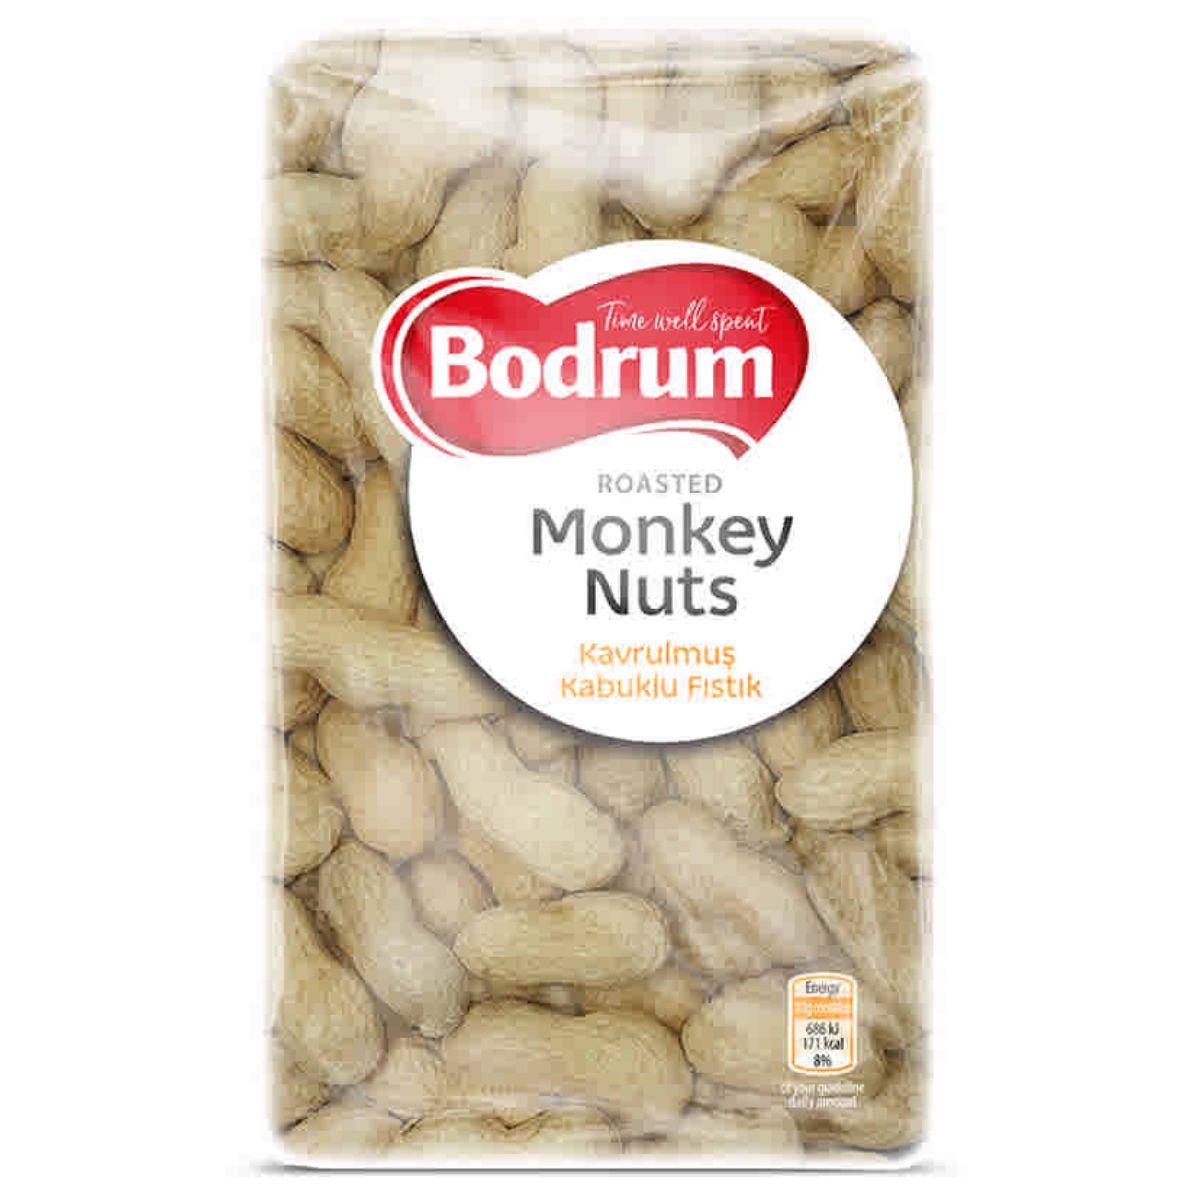 Bodrum Monkey Nuts Roasted in a bag.